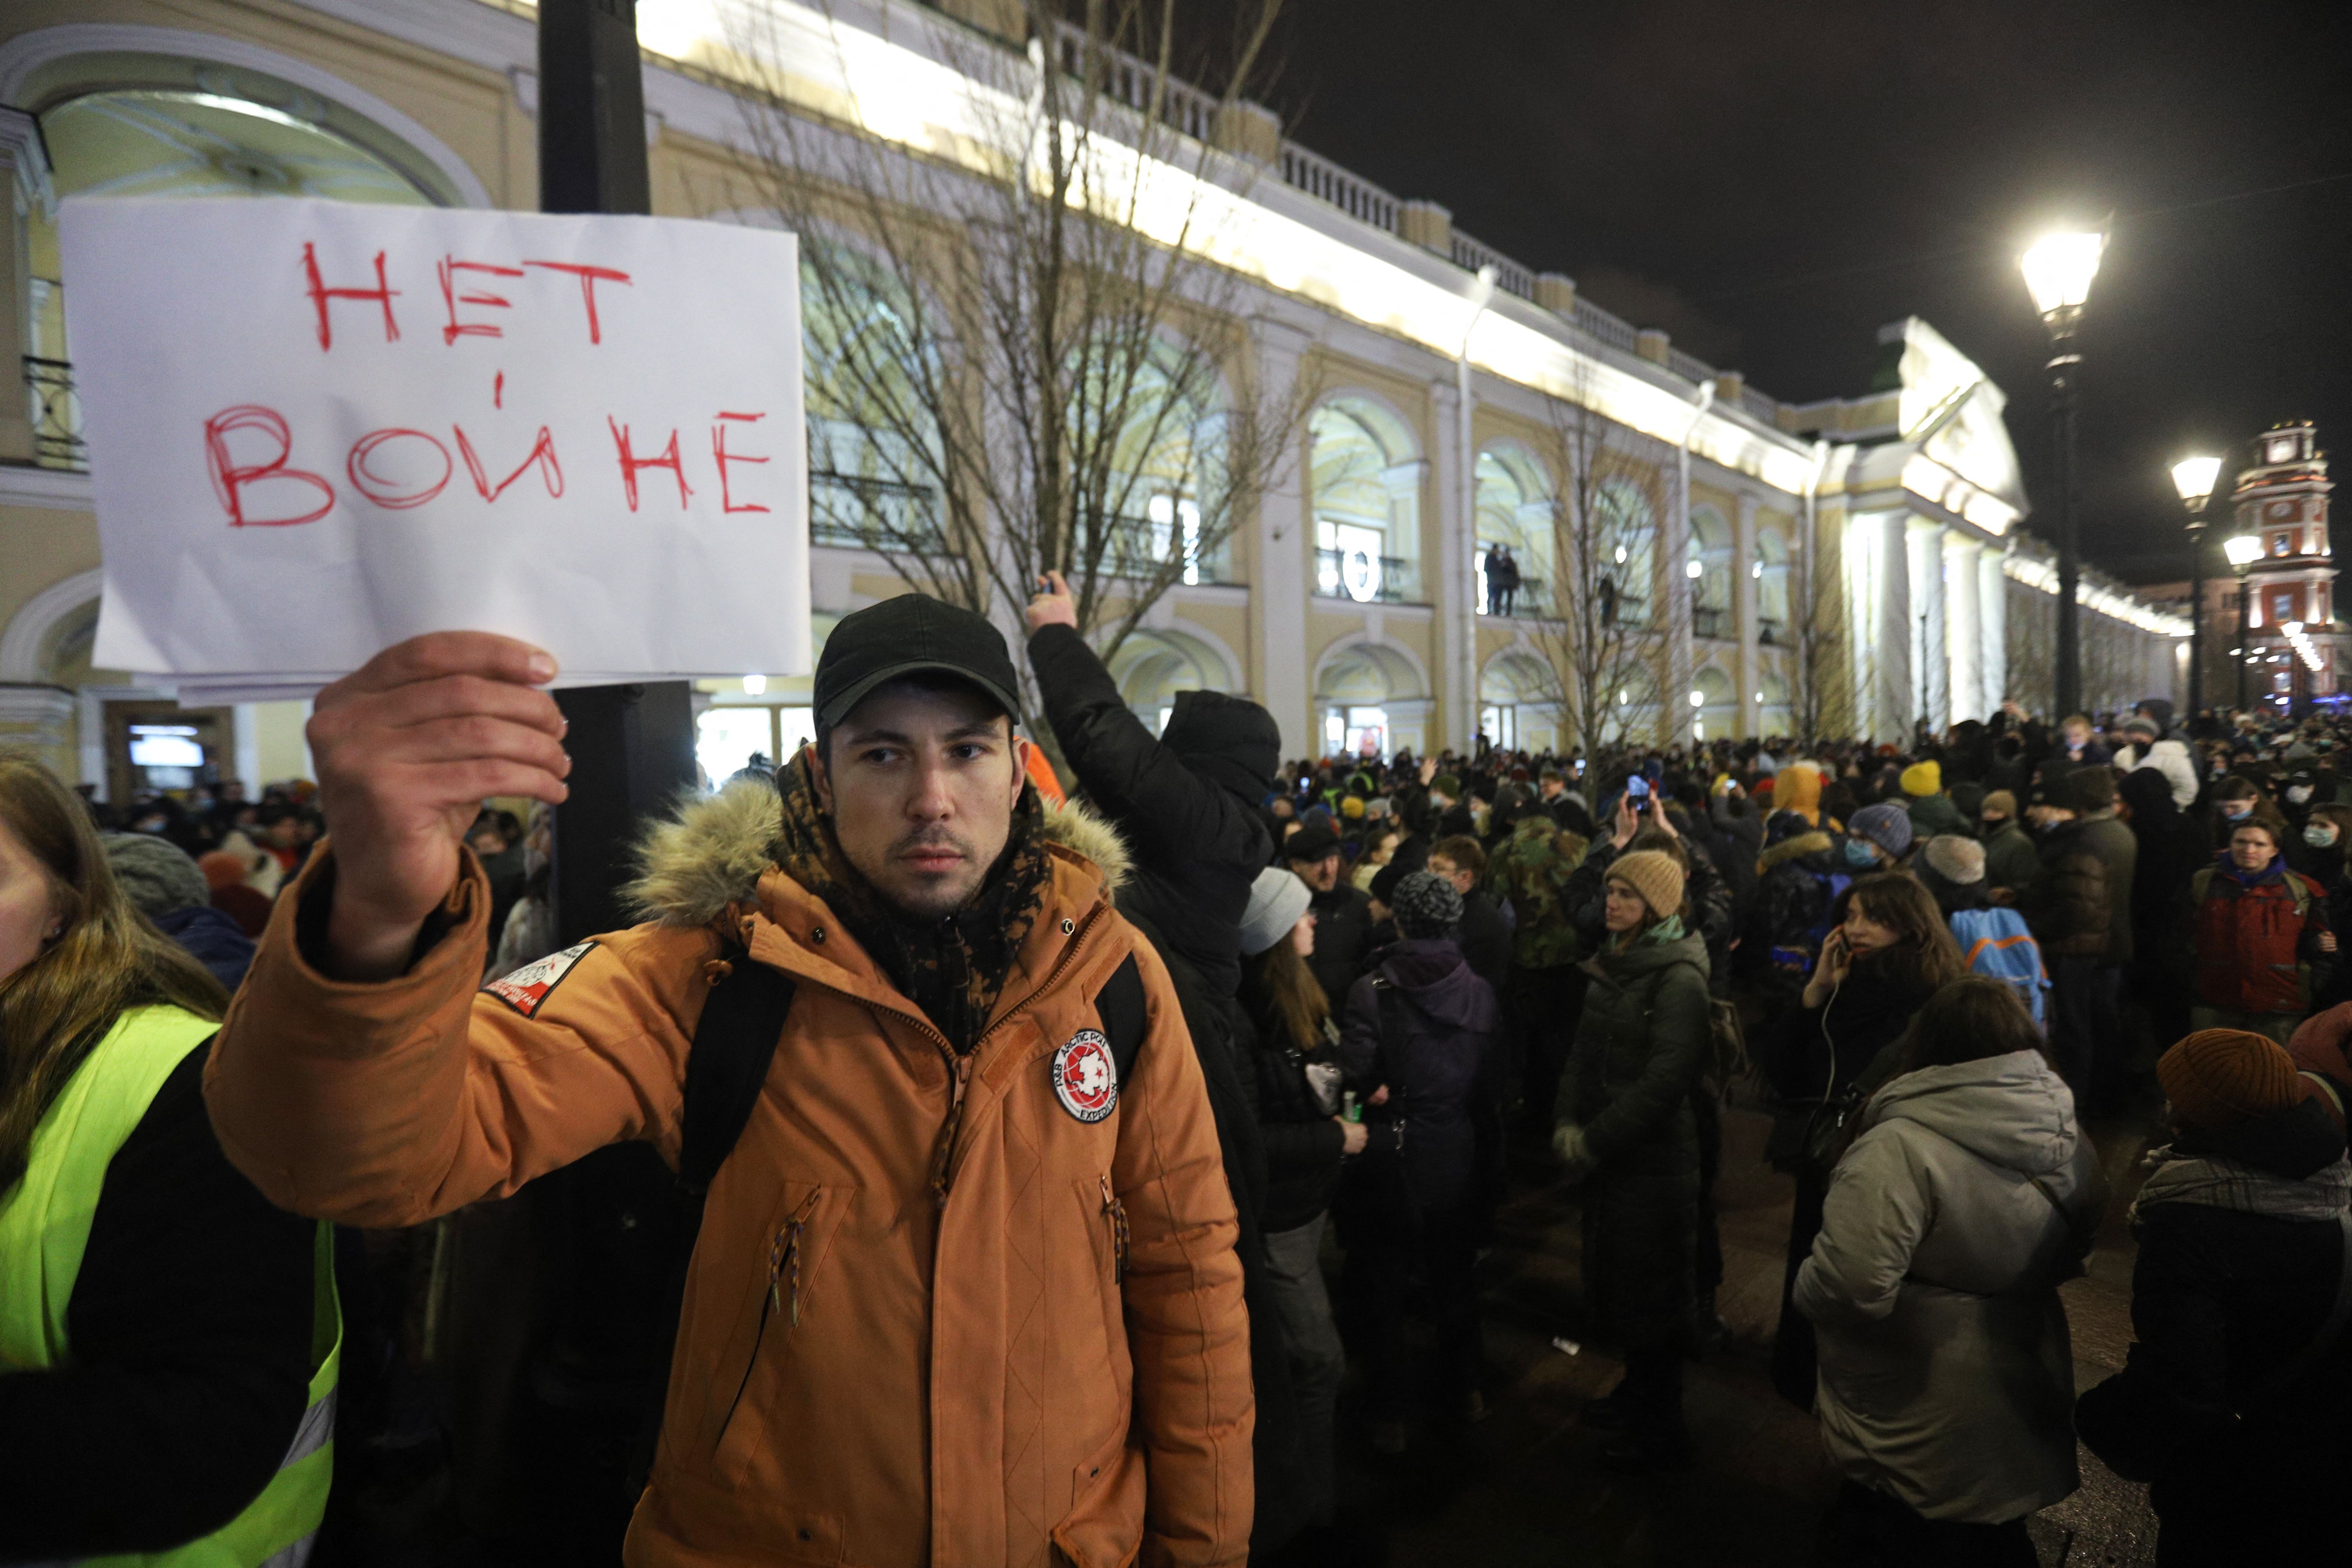 Photo of a person holding a sign that says "No to war" in Russian as they stand with a crowd of protesters